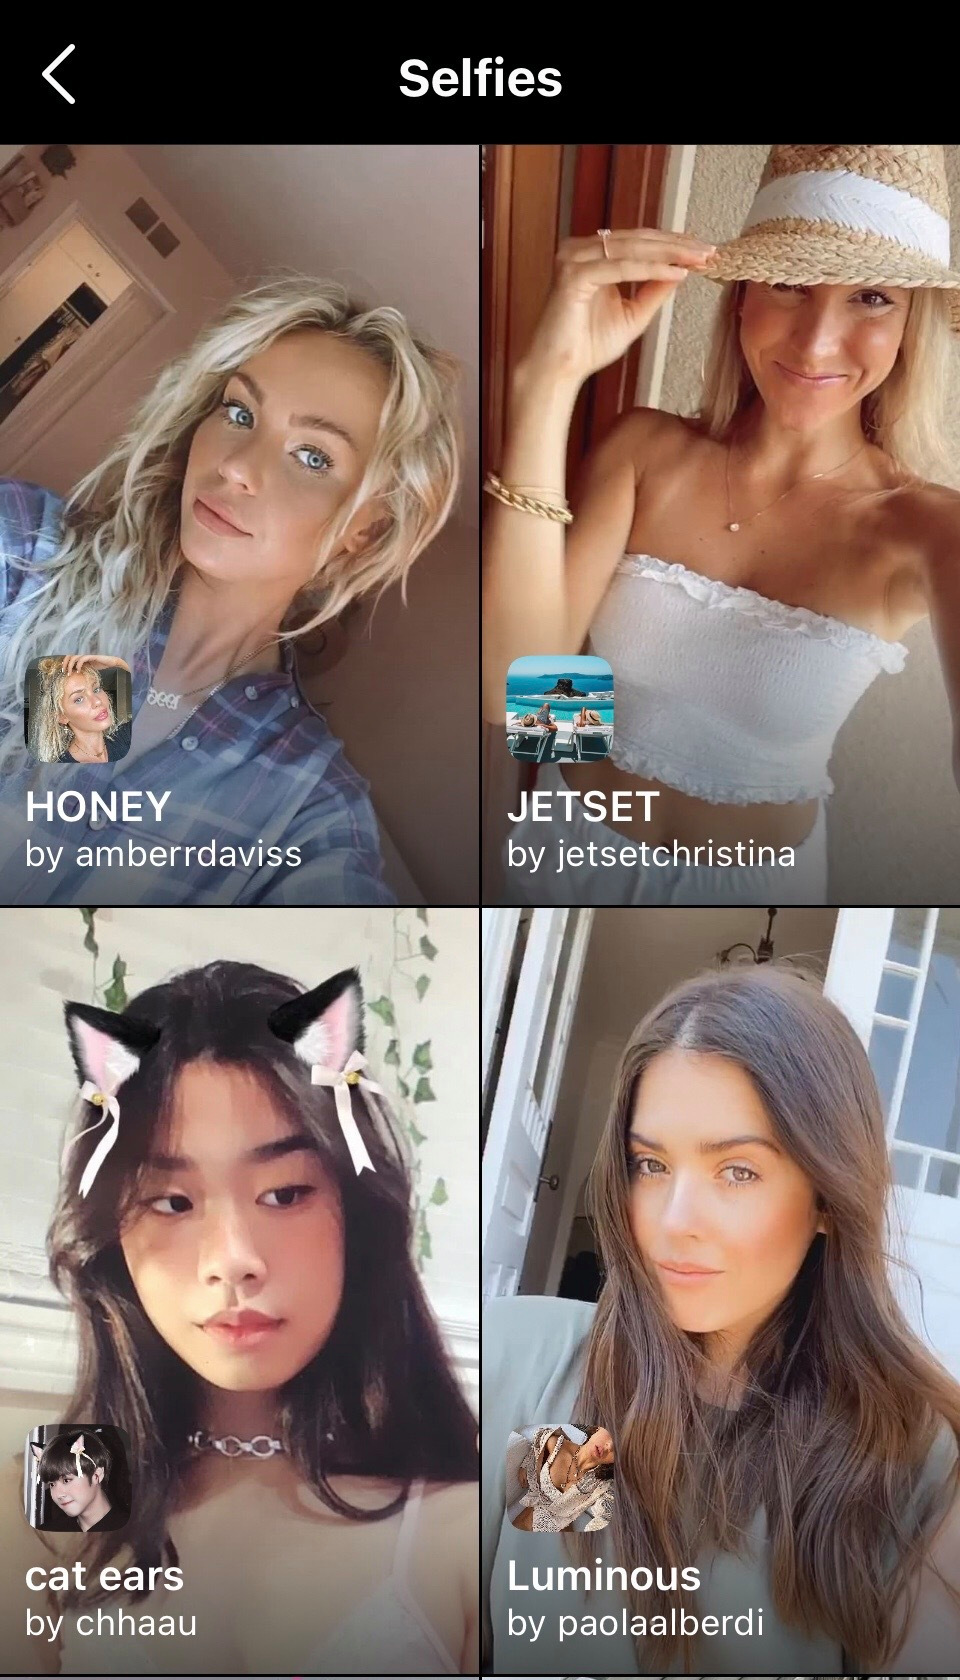 How beauty filters took over social media